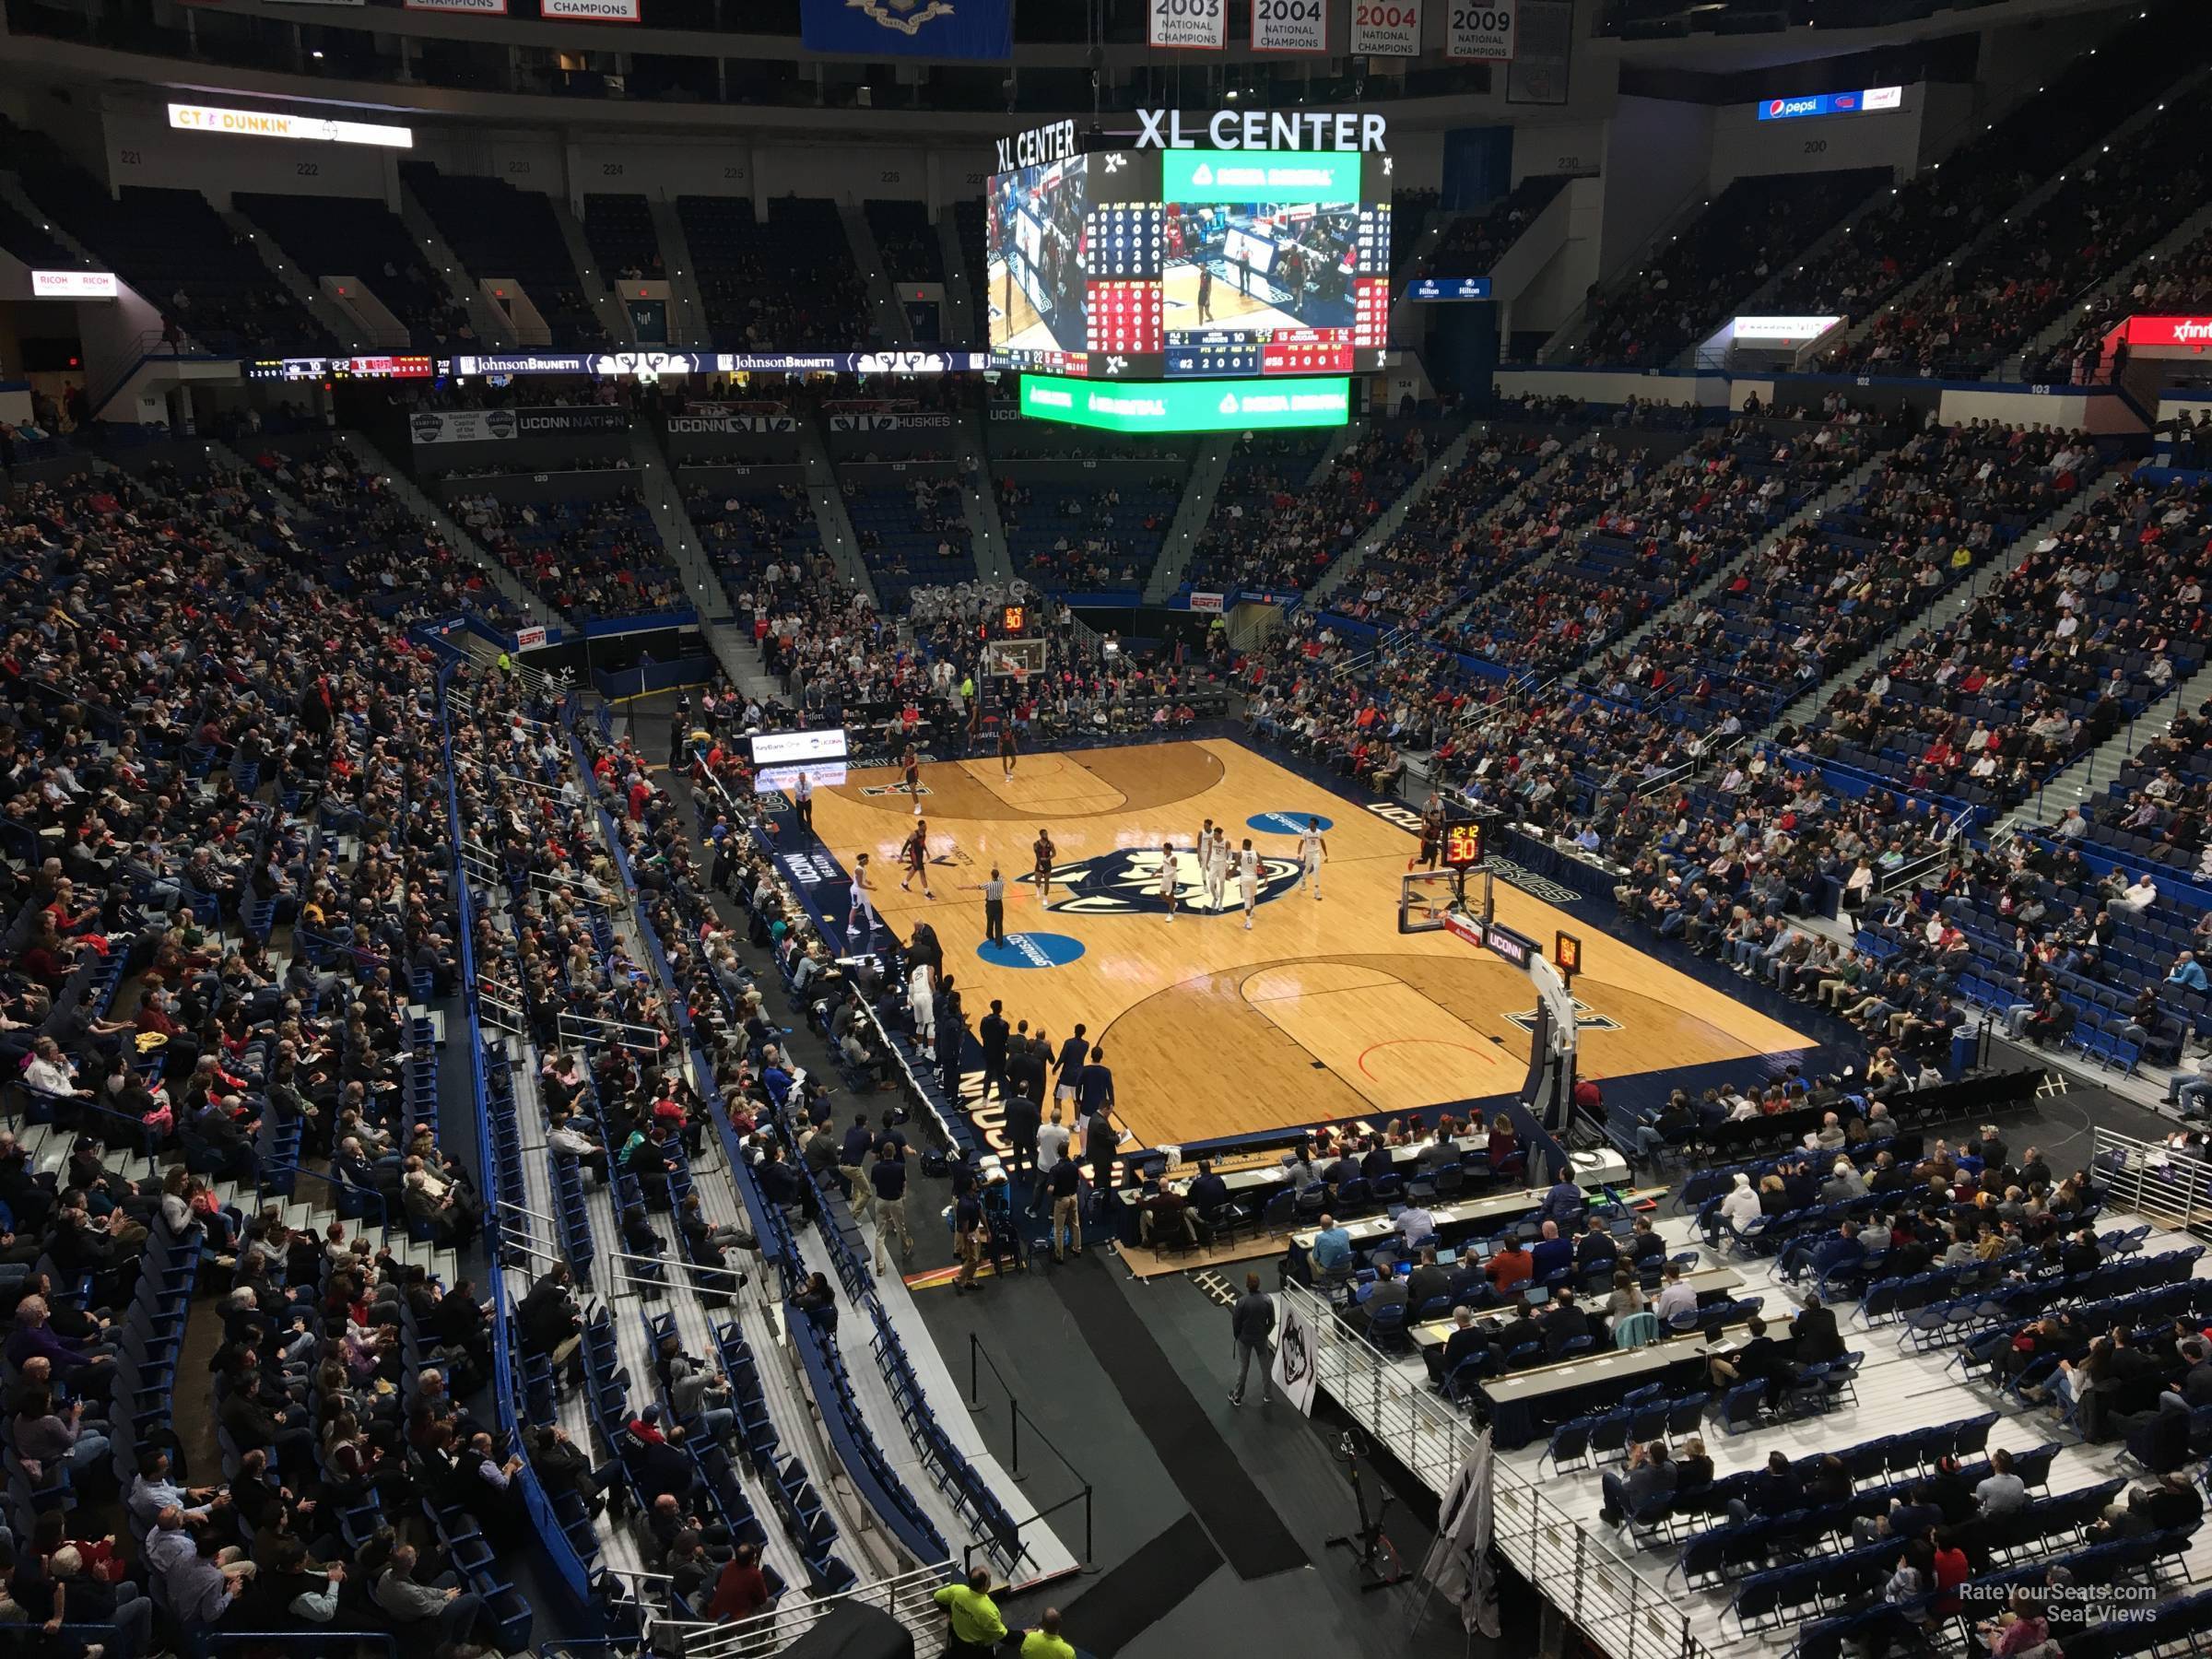 section 239, row a seat view  - xl center